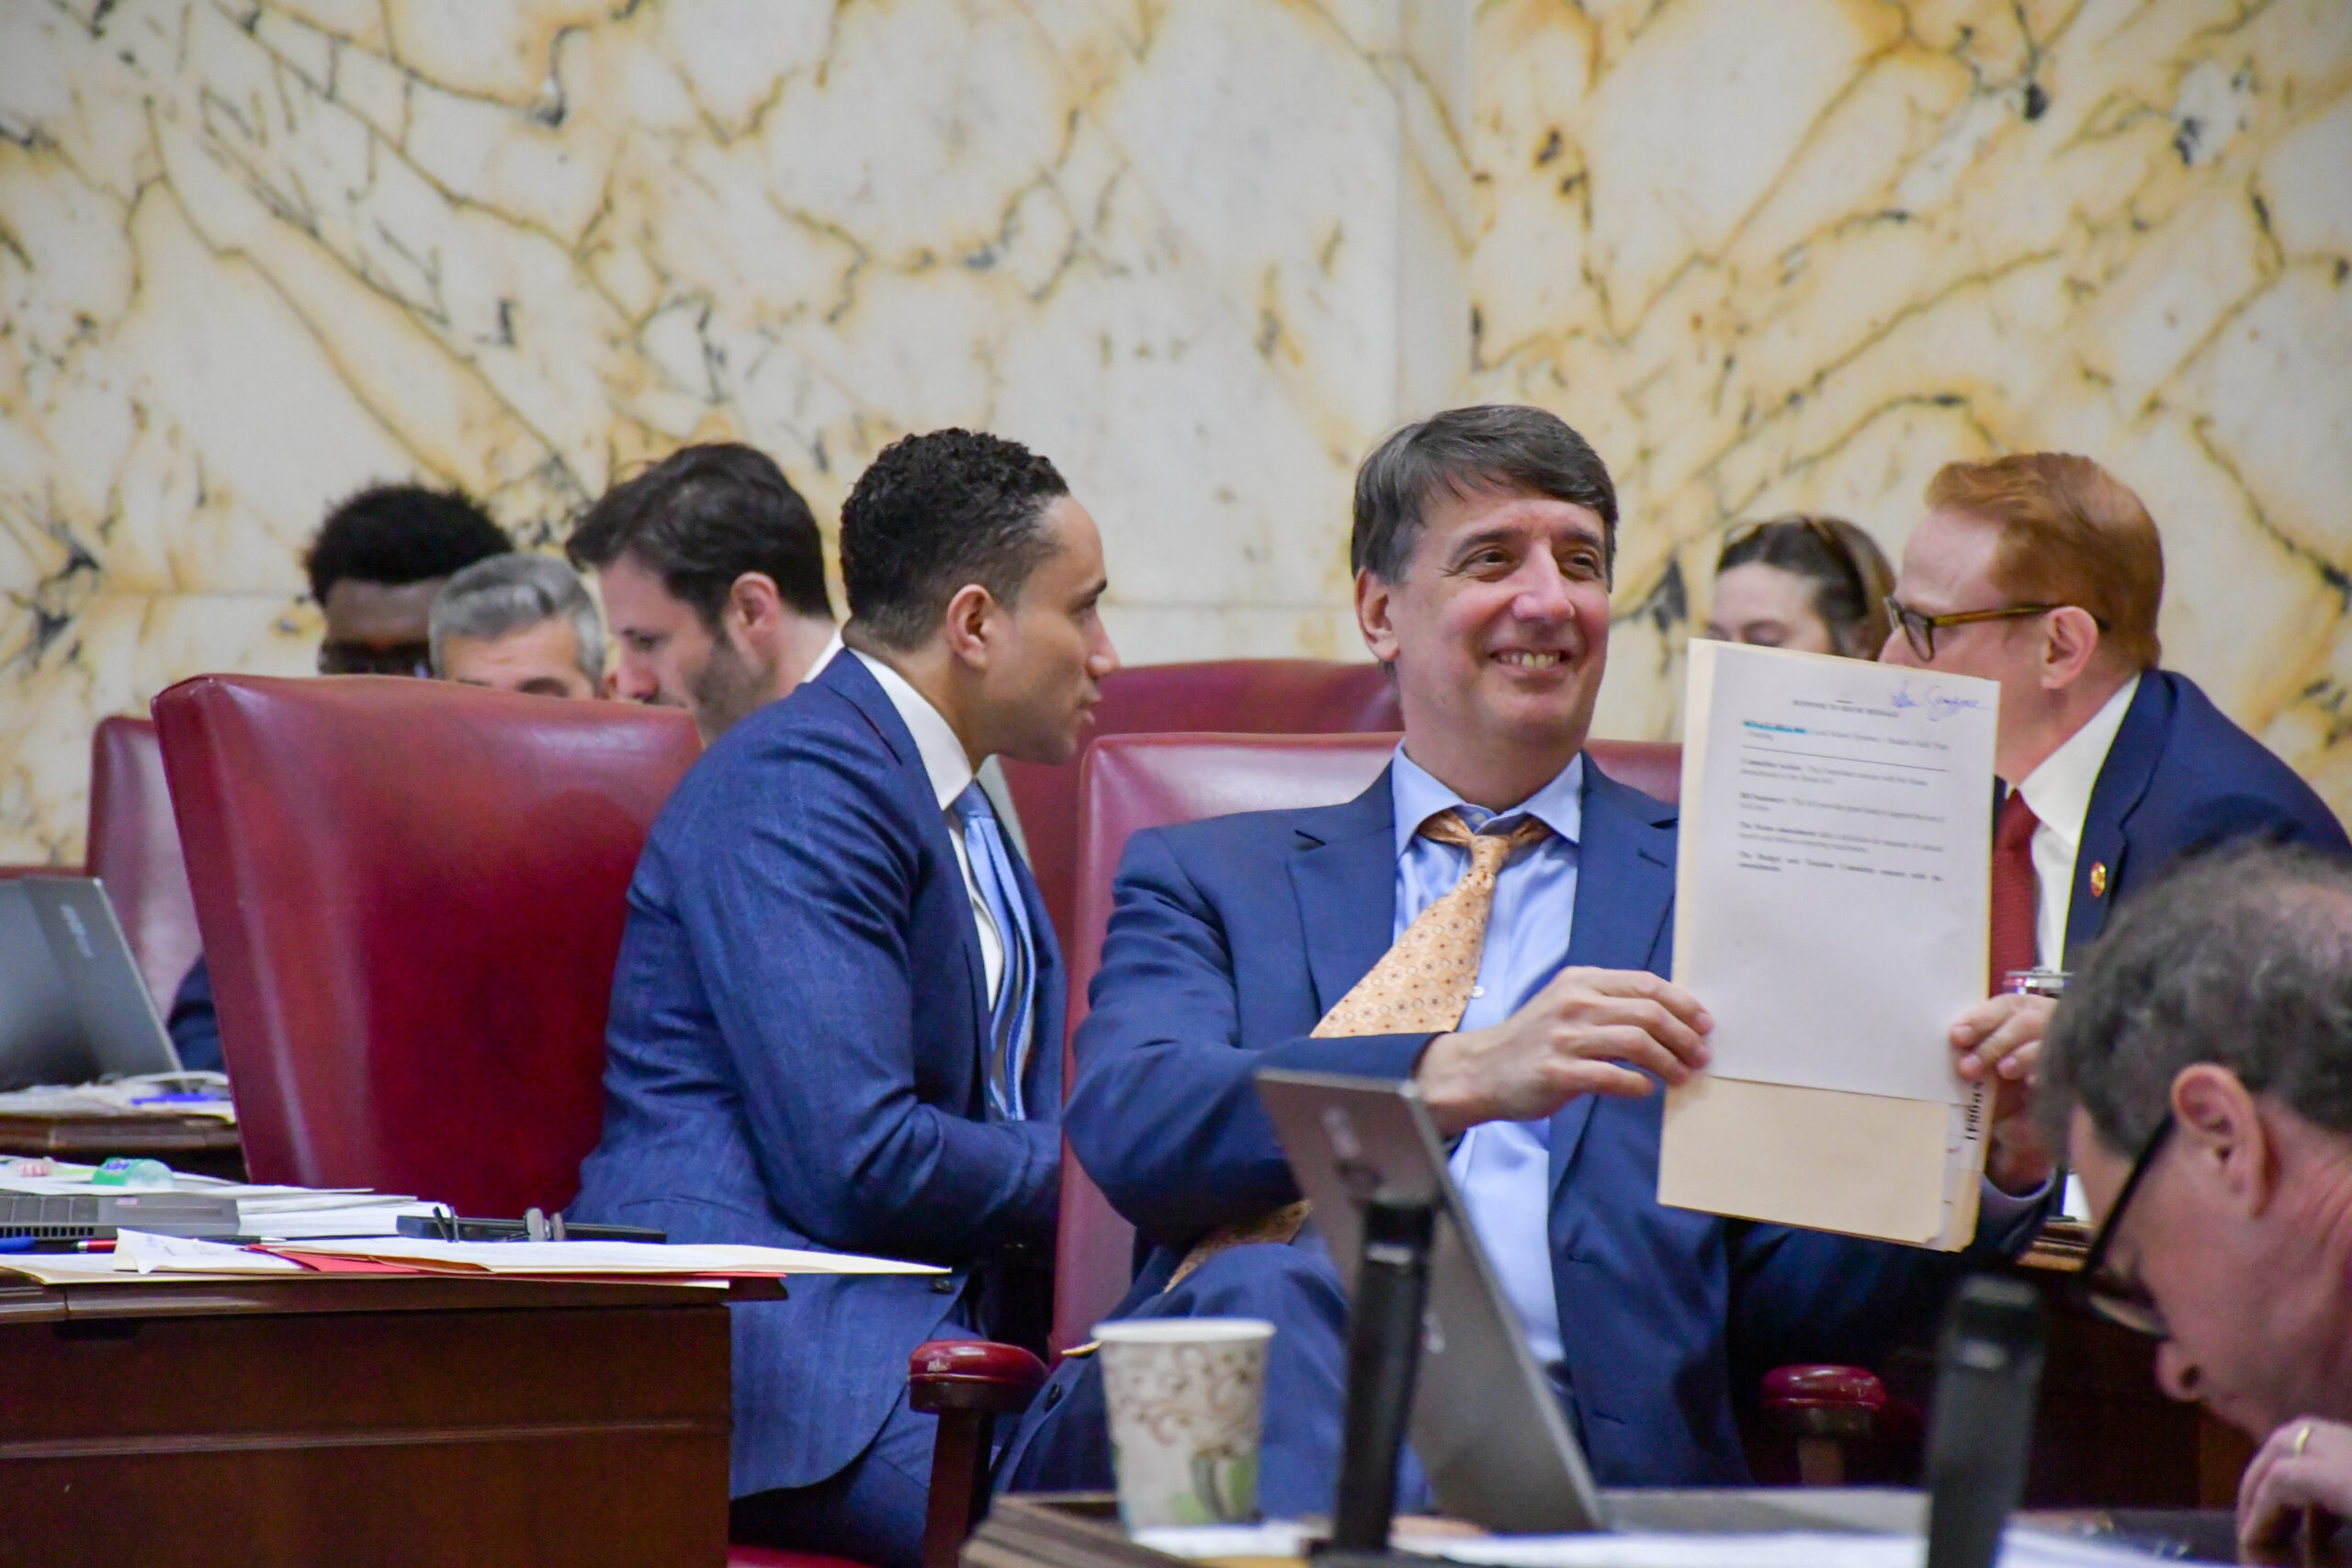 Sen. Guy Guzzone, D-Howard, shows a note to his colleagues. (Christine Zhu/Capital News Service)